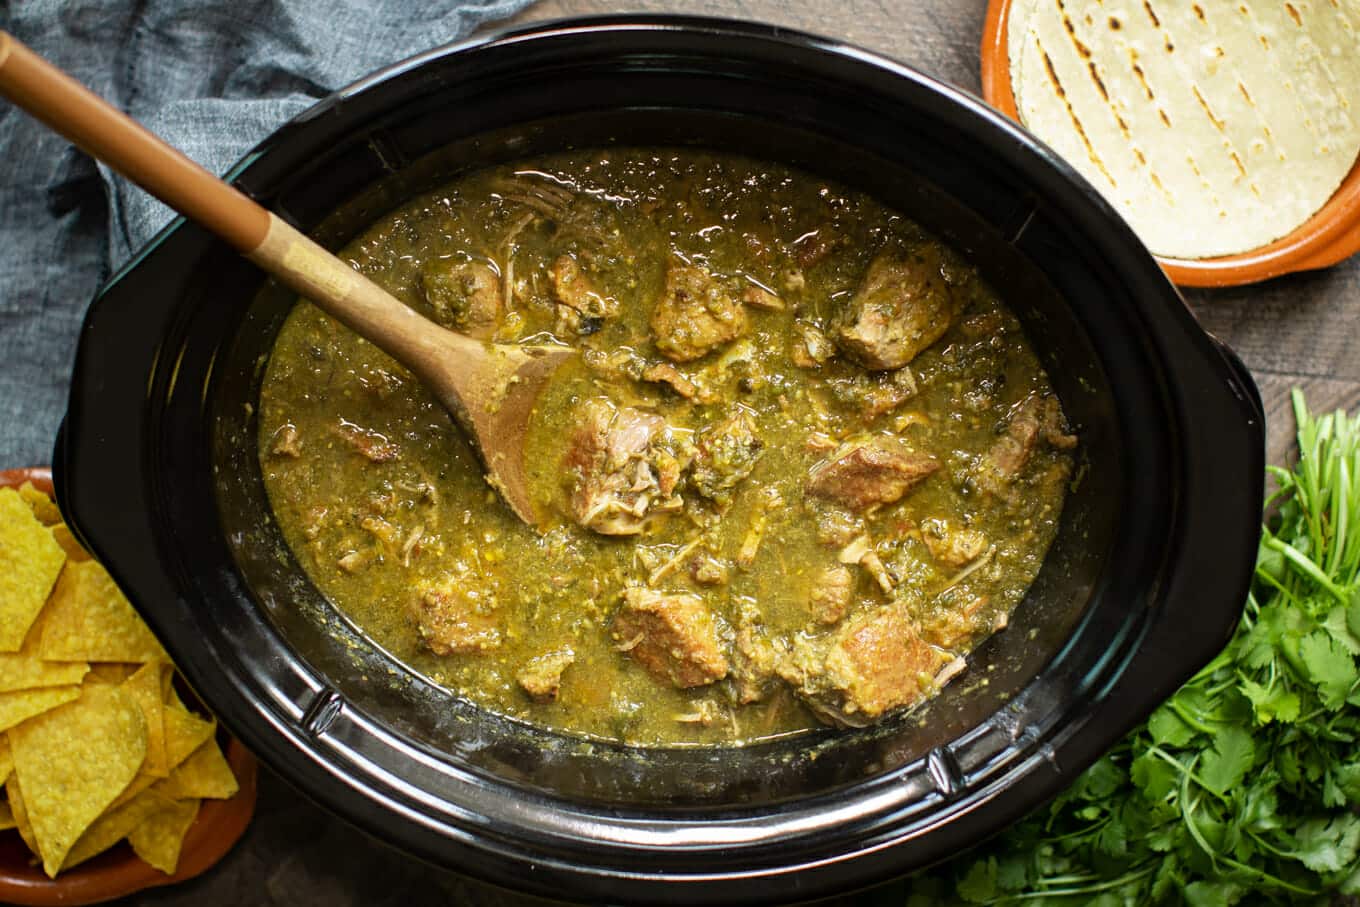 chile verde in the slow cooker with wooden spoon in it. Tortillas on the side.